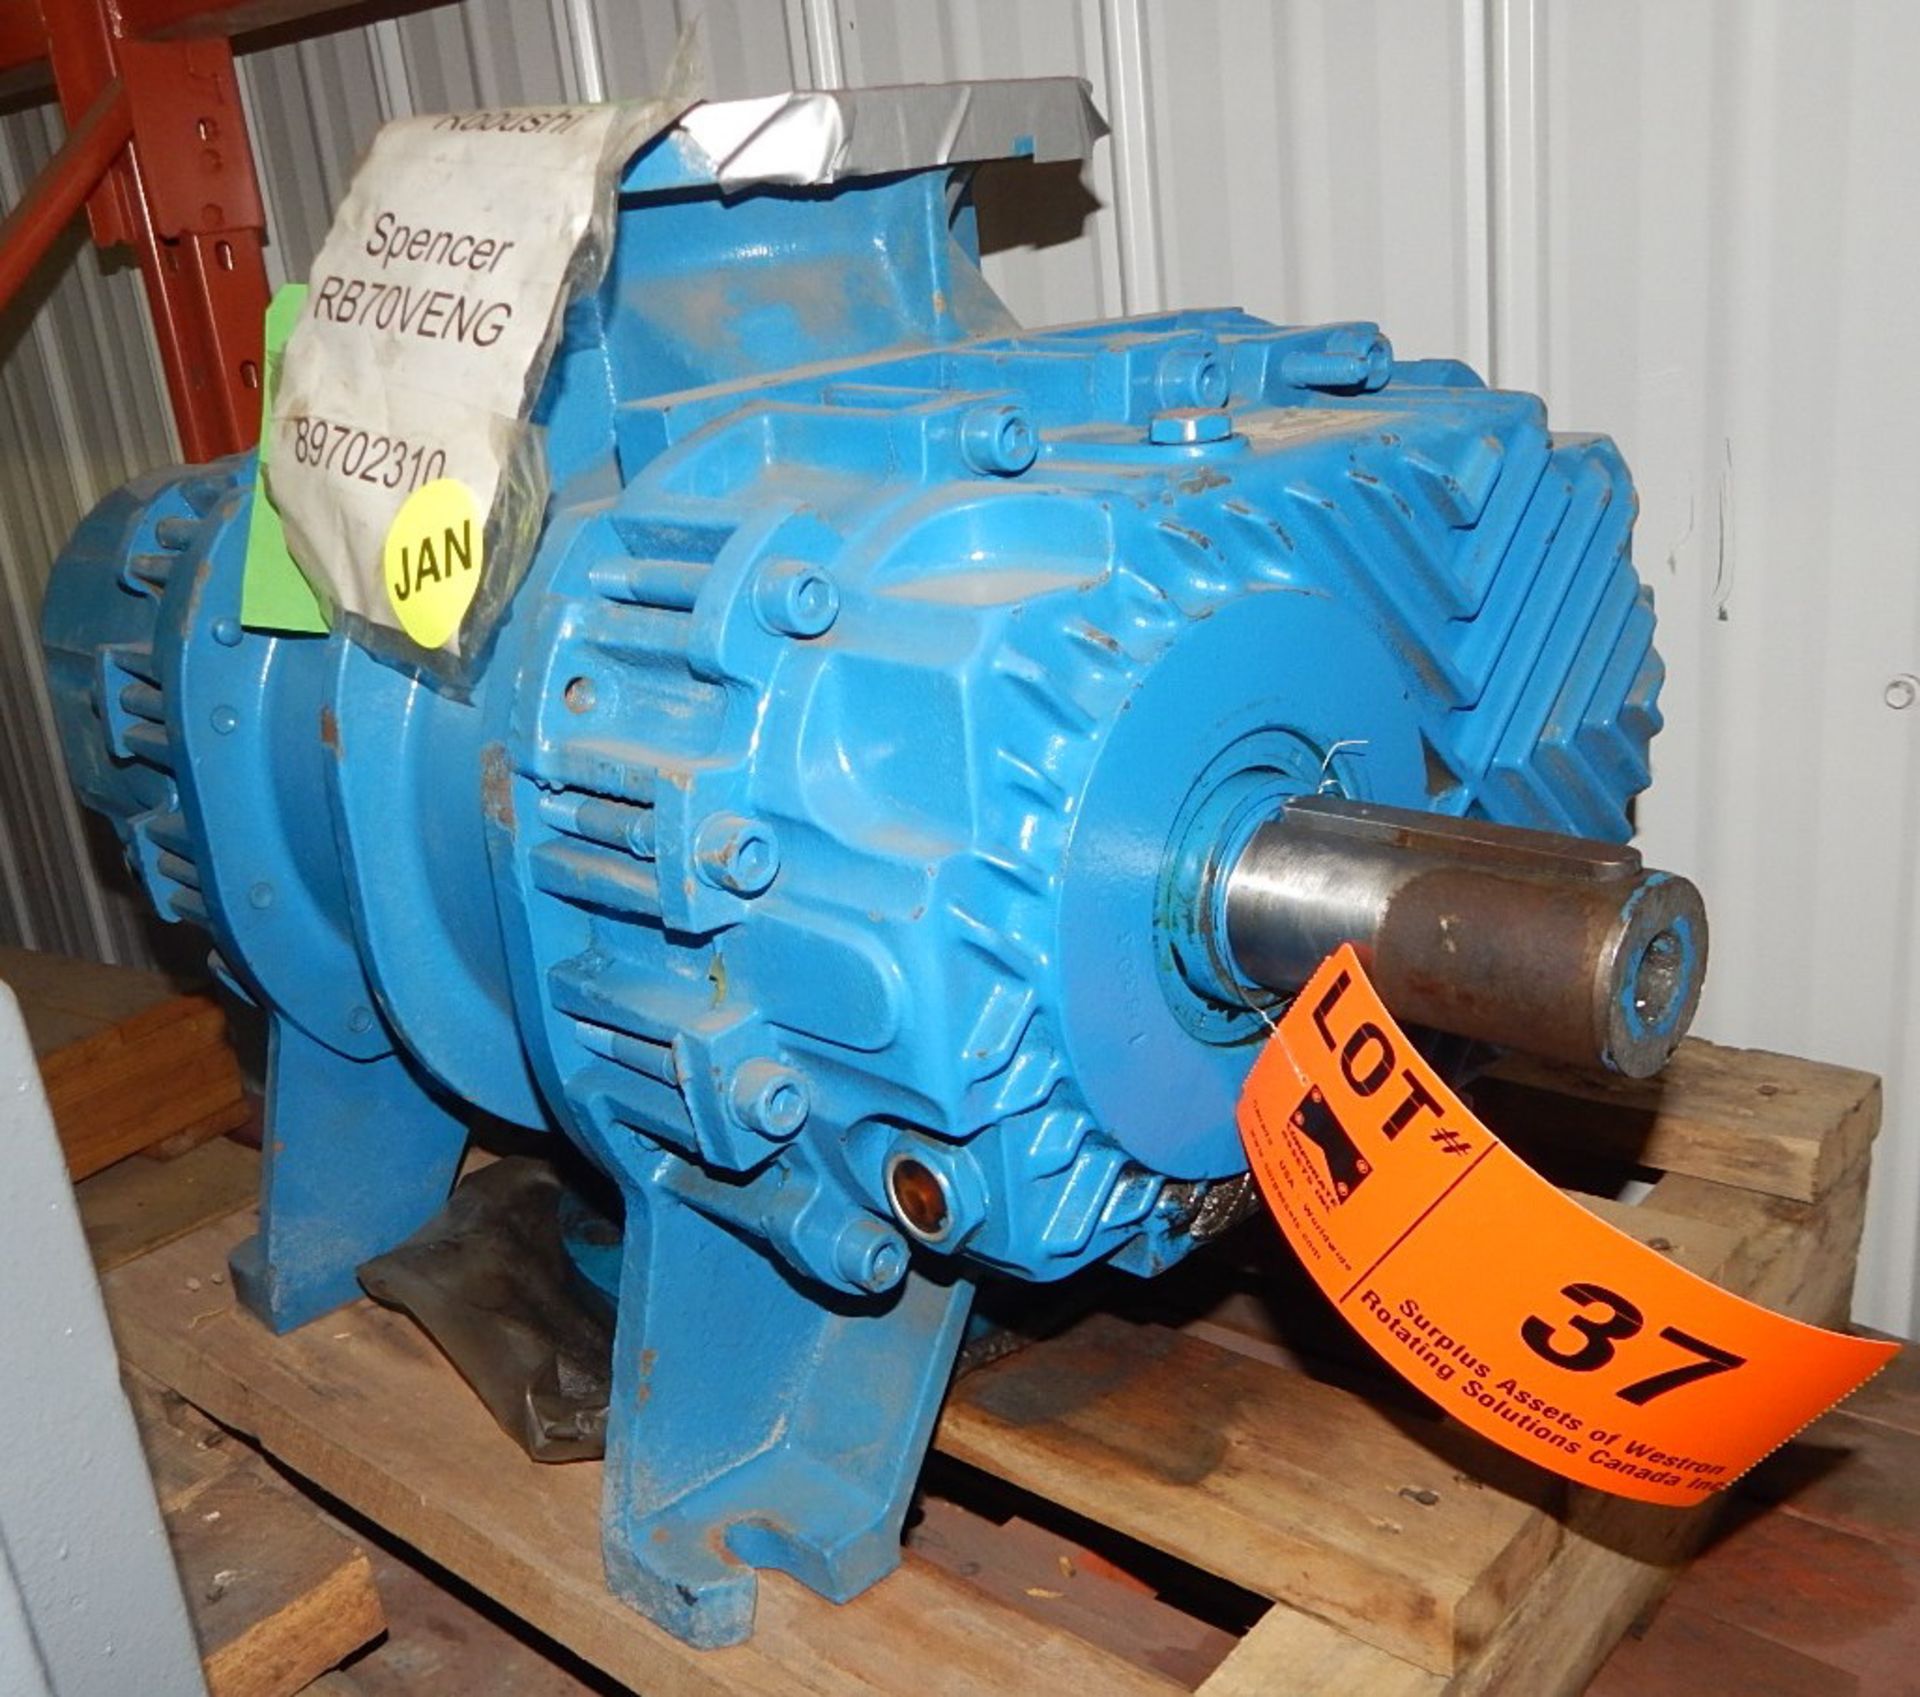 ROBUSHI SPENCER RB70VENG BLOWER, S/N: N/A (CI) [SKU 1019] (LOCATED IN DIDSBURY, AB) [RIGGING FEE FOR